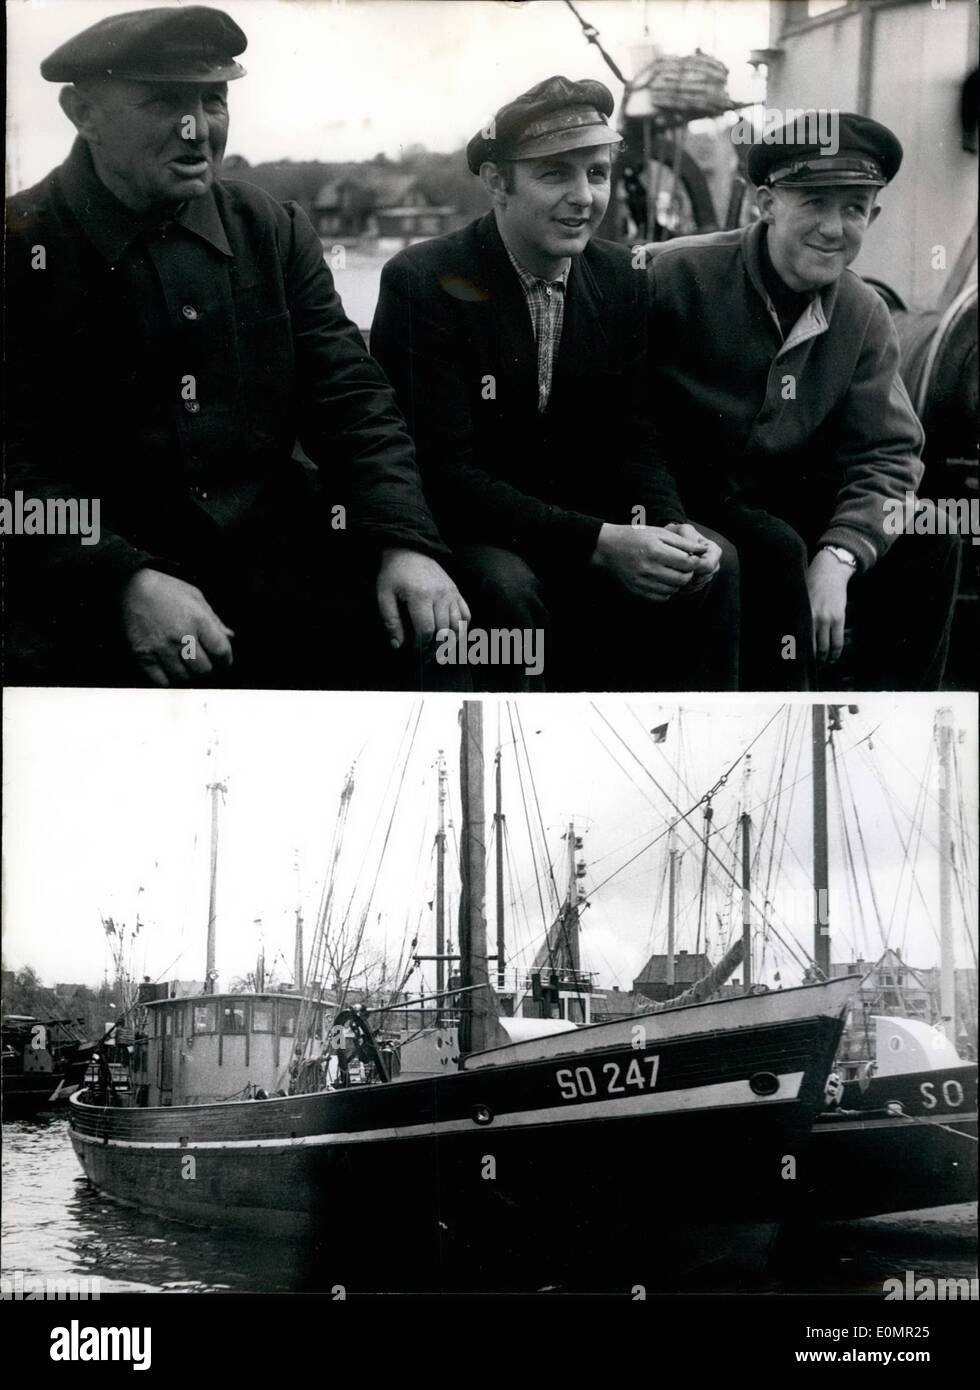 May 05, 1956 - German Ambassy payed 1000 Rubel for German fishermen. Two fisherboats from Kiel/Germany were captured by the Soviets off Memel on the coast of East-Prussia. The boats had entered the 12- miles-zone, when they were fishing salmons. The cutters were brought to the harbour Memel. The Soviets were quite friendly and correct but they told the fishermen they would have to pay 1000 Rubels. A cable to the German Ambassy at Moscow was answered that the Ambasy will pay for them Stock Photo